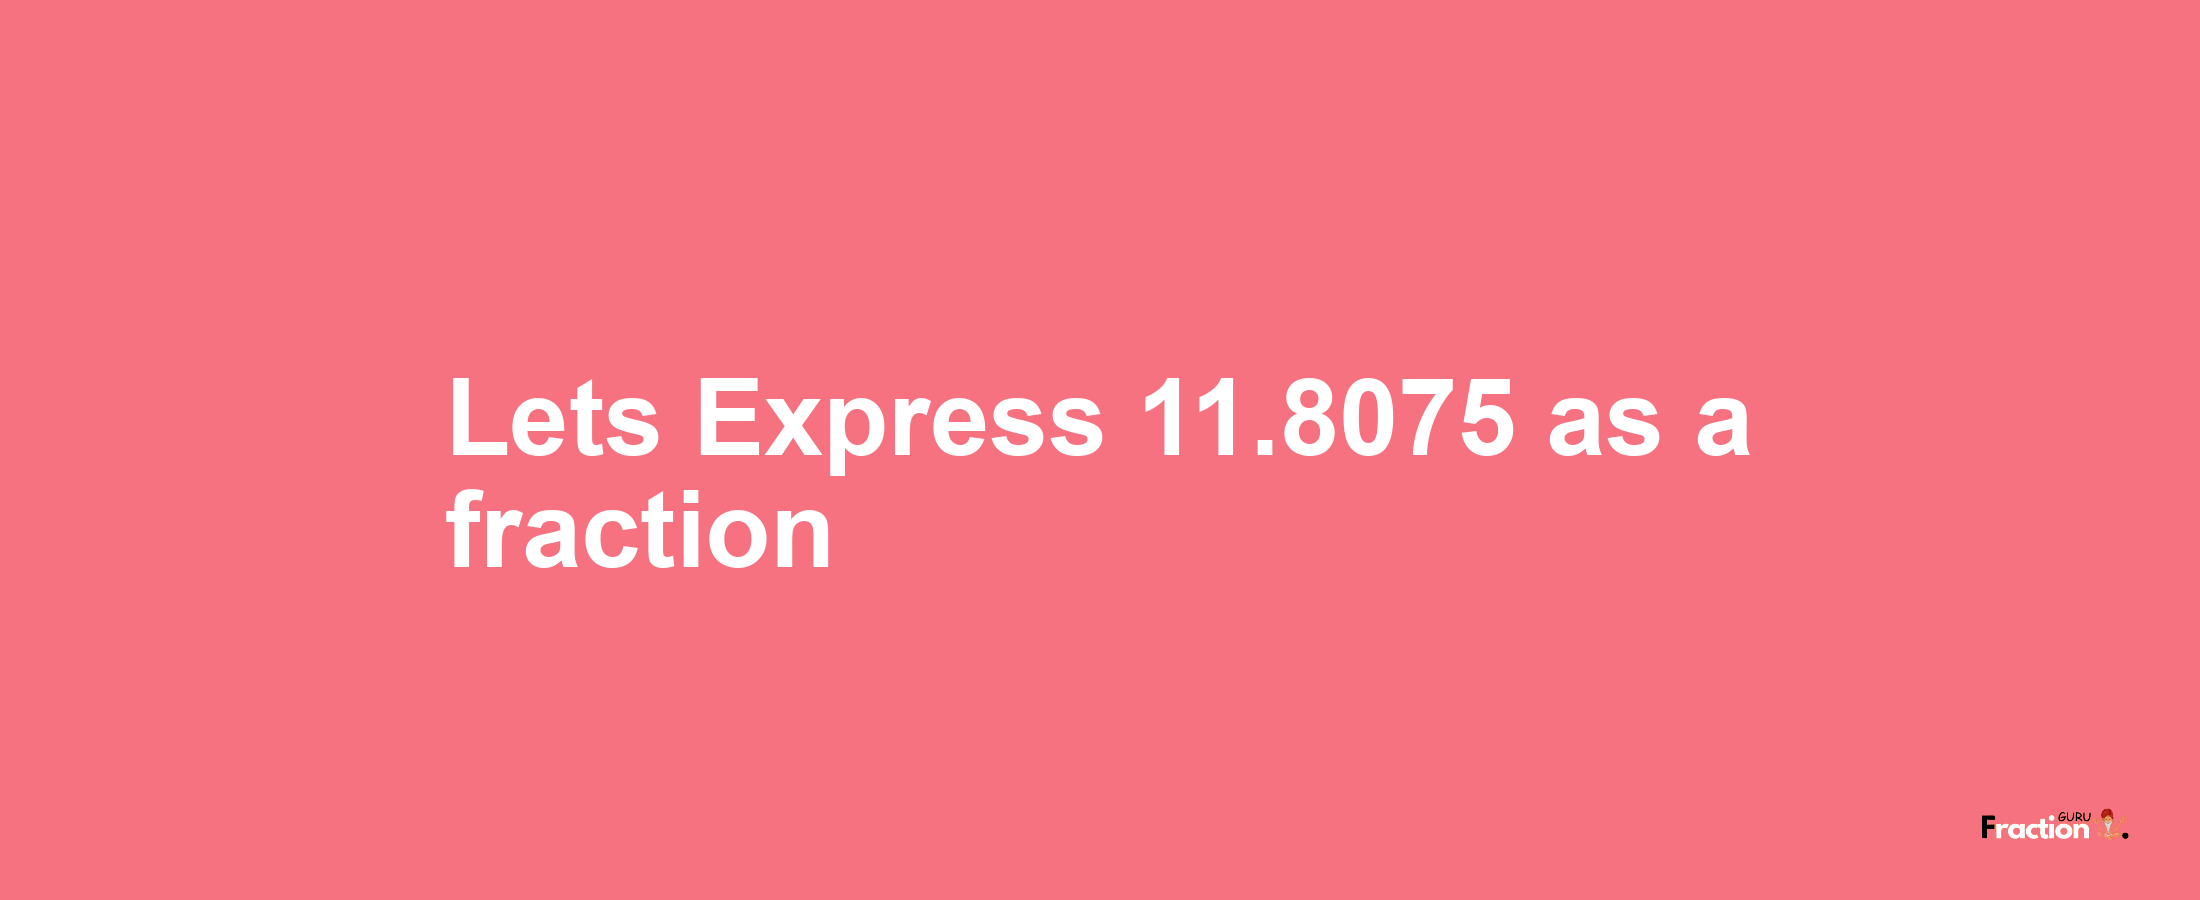 Lets Express 11.8075 as afraction